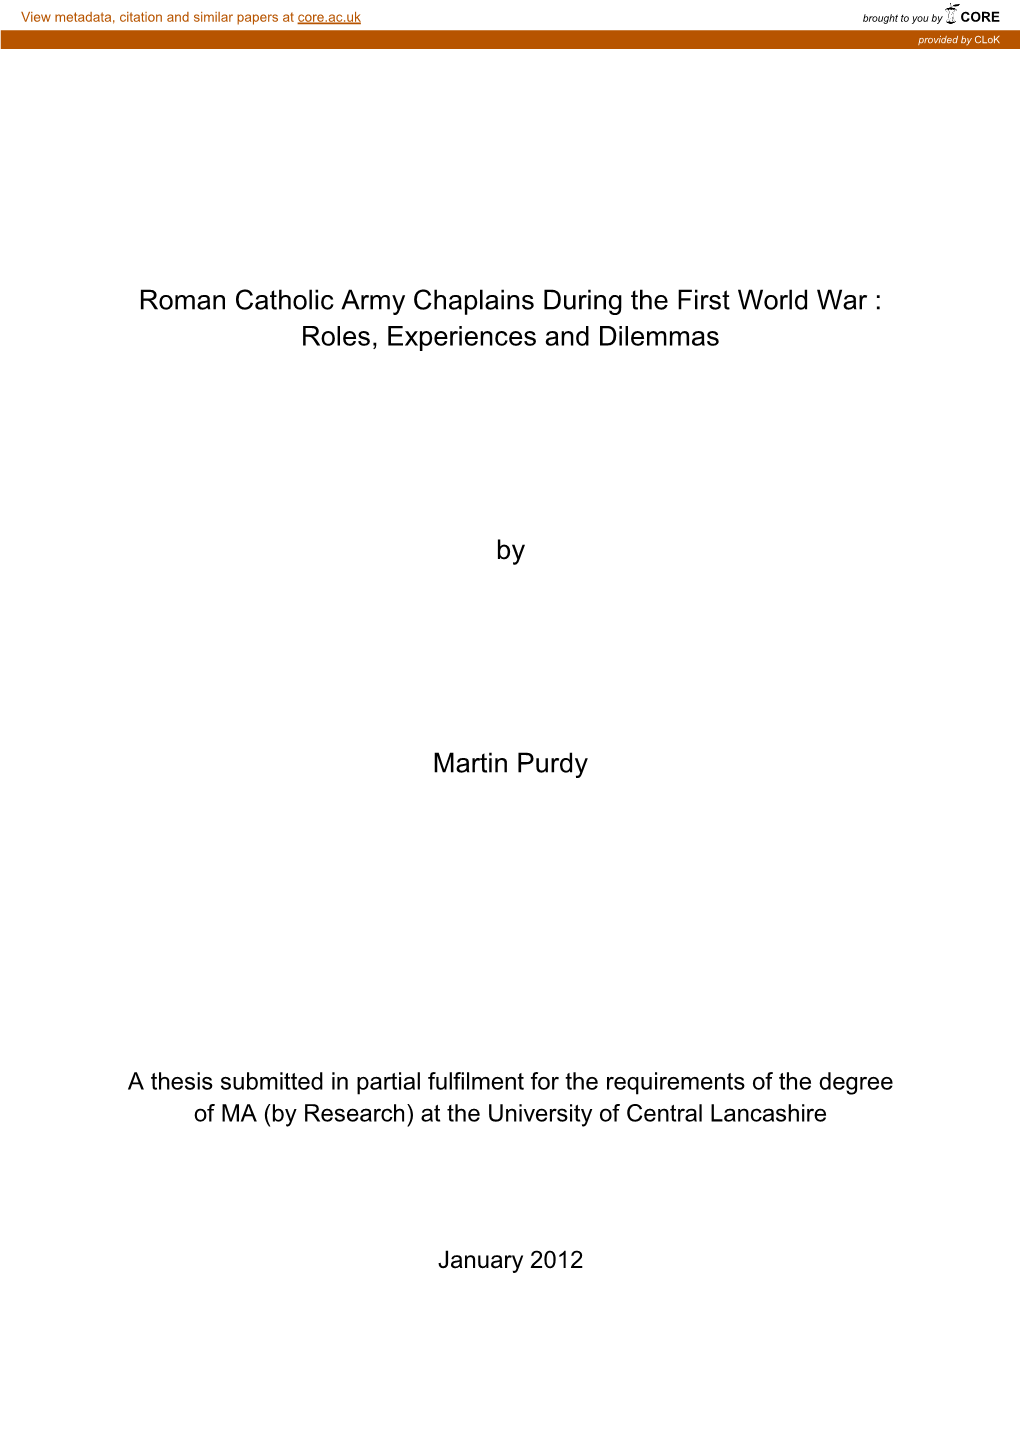 Roman Catholic Army Chaplains During the First World War : Roles, Experiences and Dilemmas